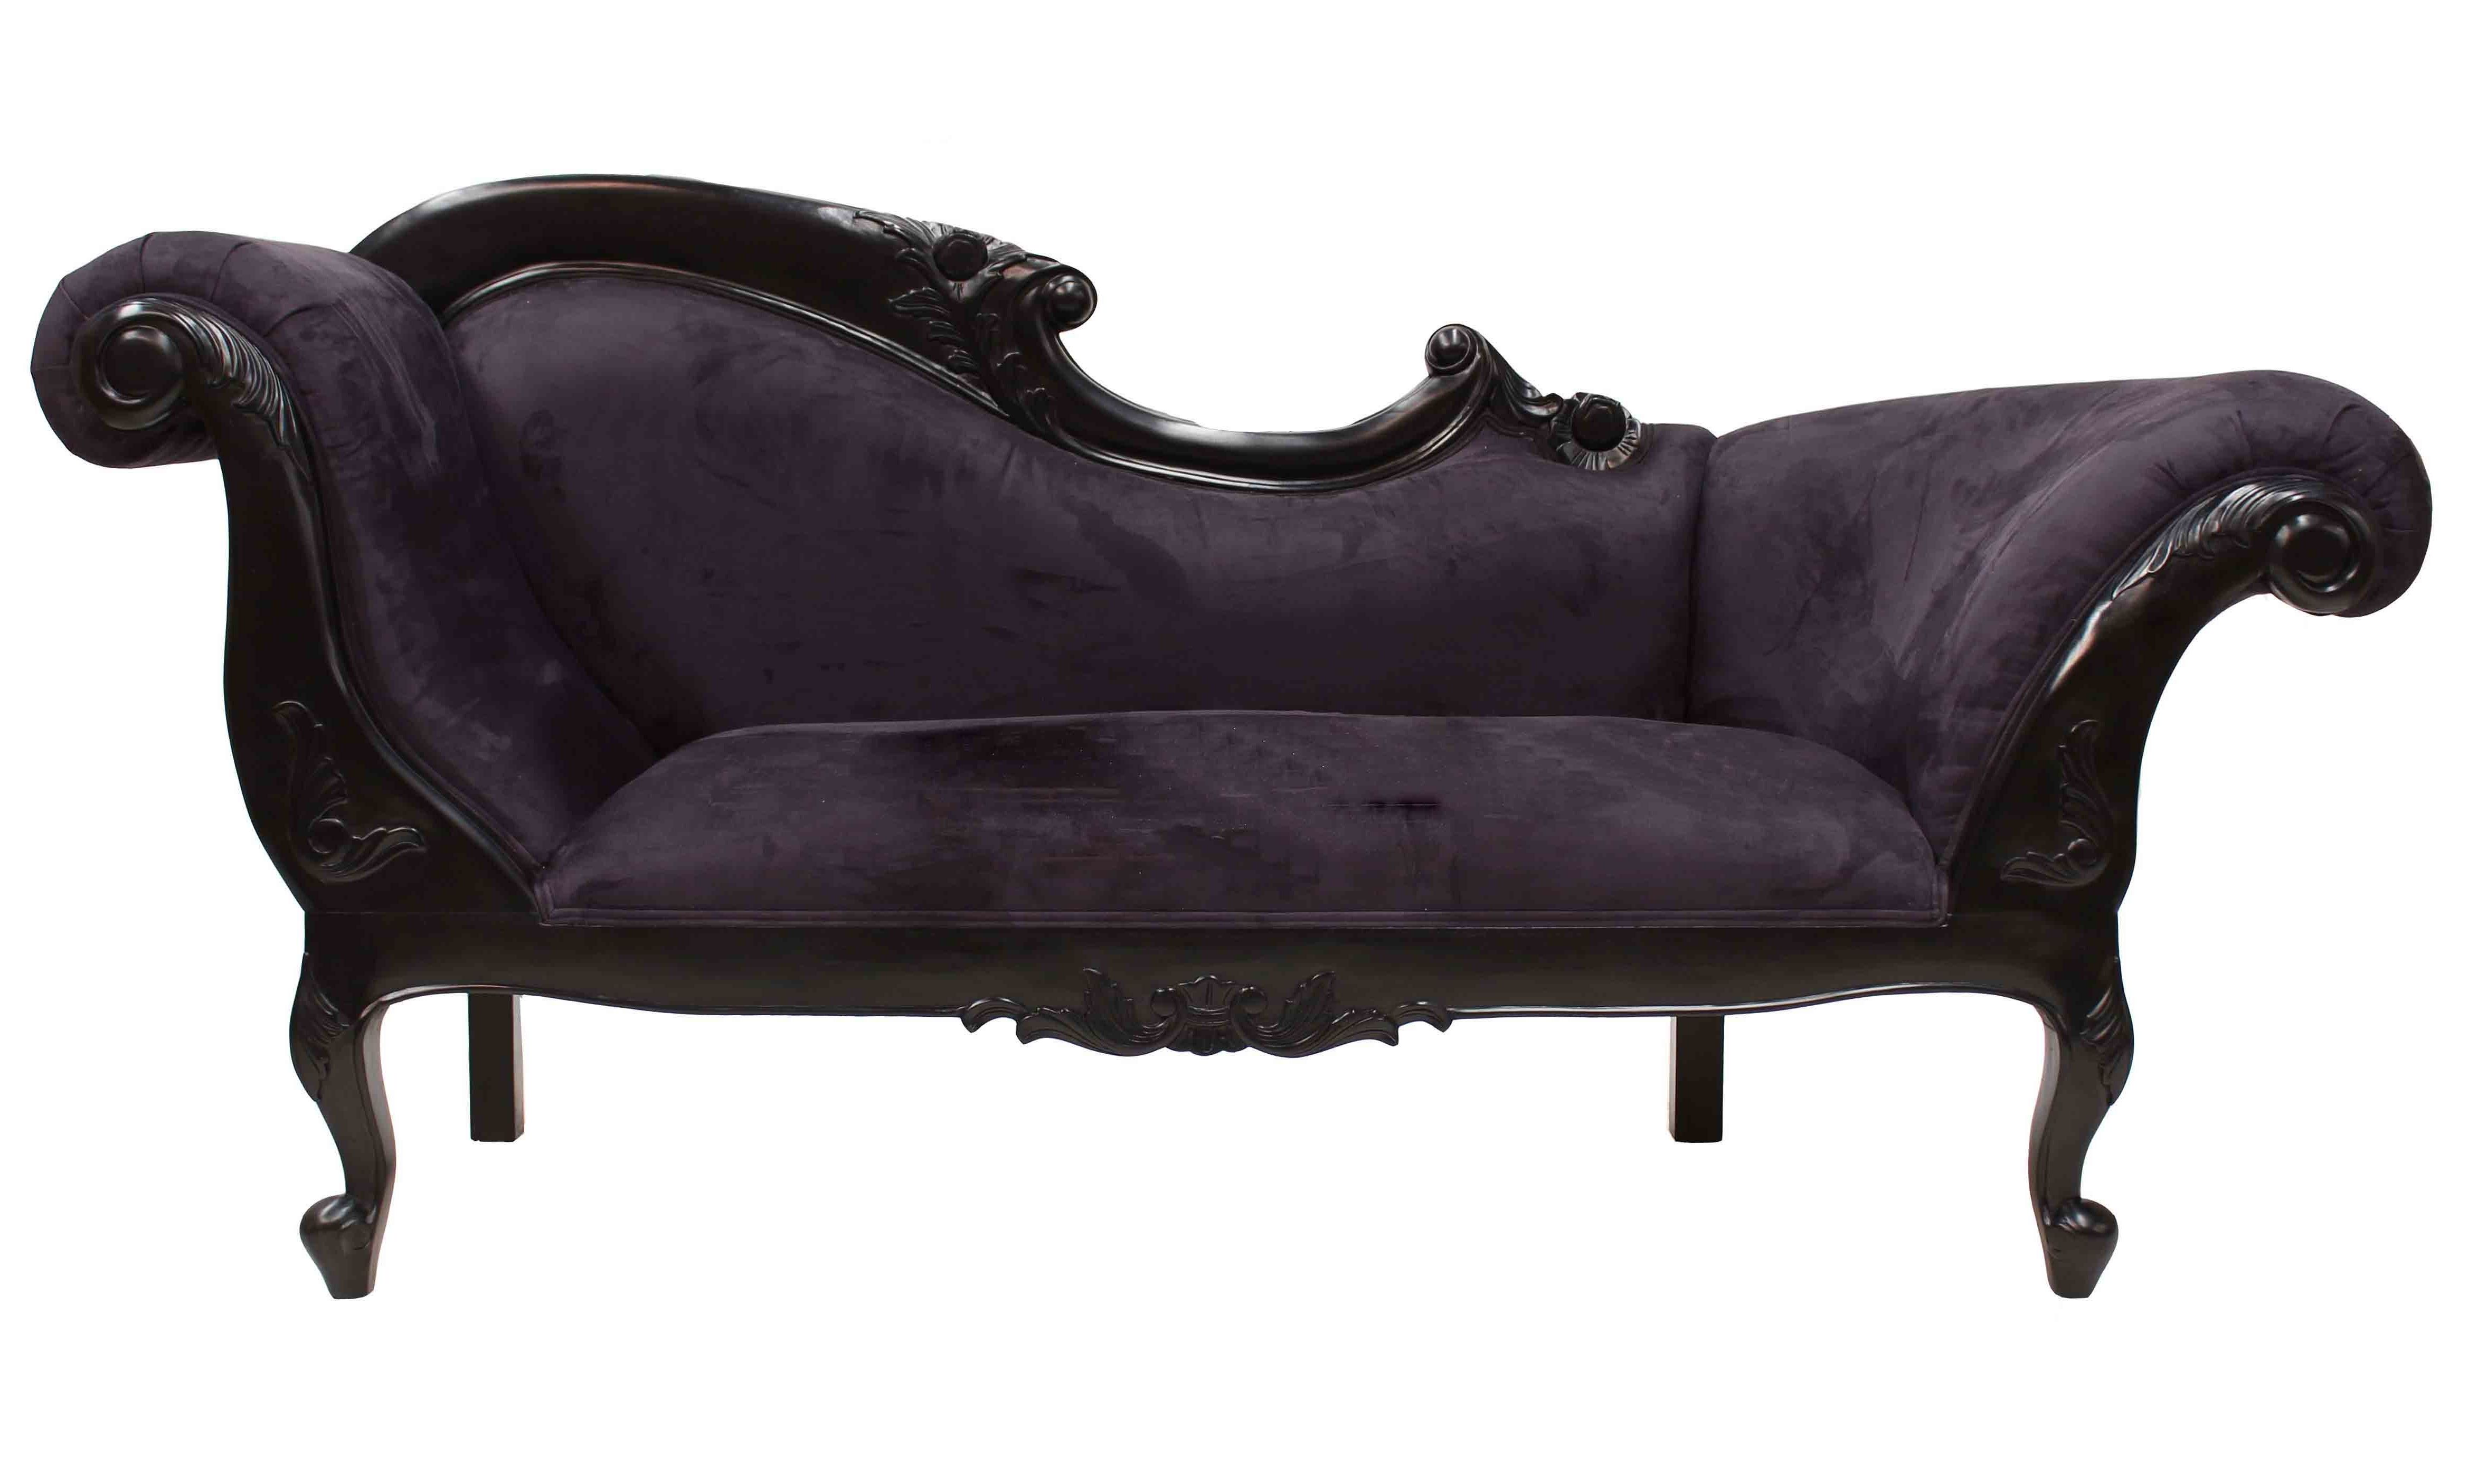 Black Chaise Lounges Within Most Popular Teak Chaise Lounge Chairs – Chaise Longue History You Might Never (View 5 of 15)